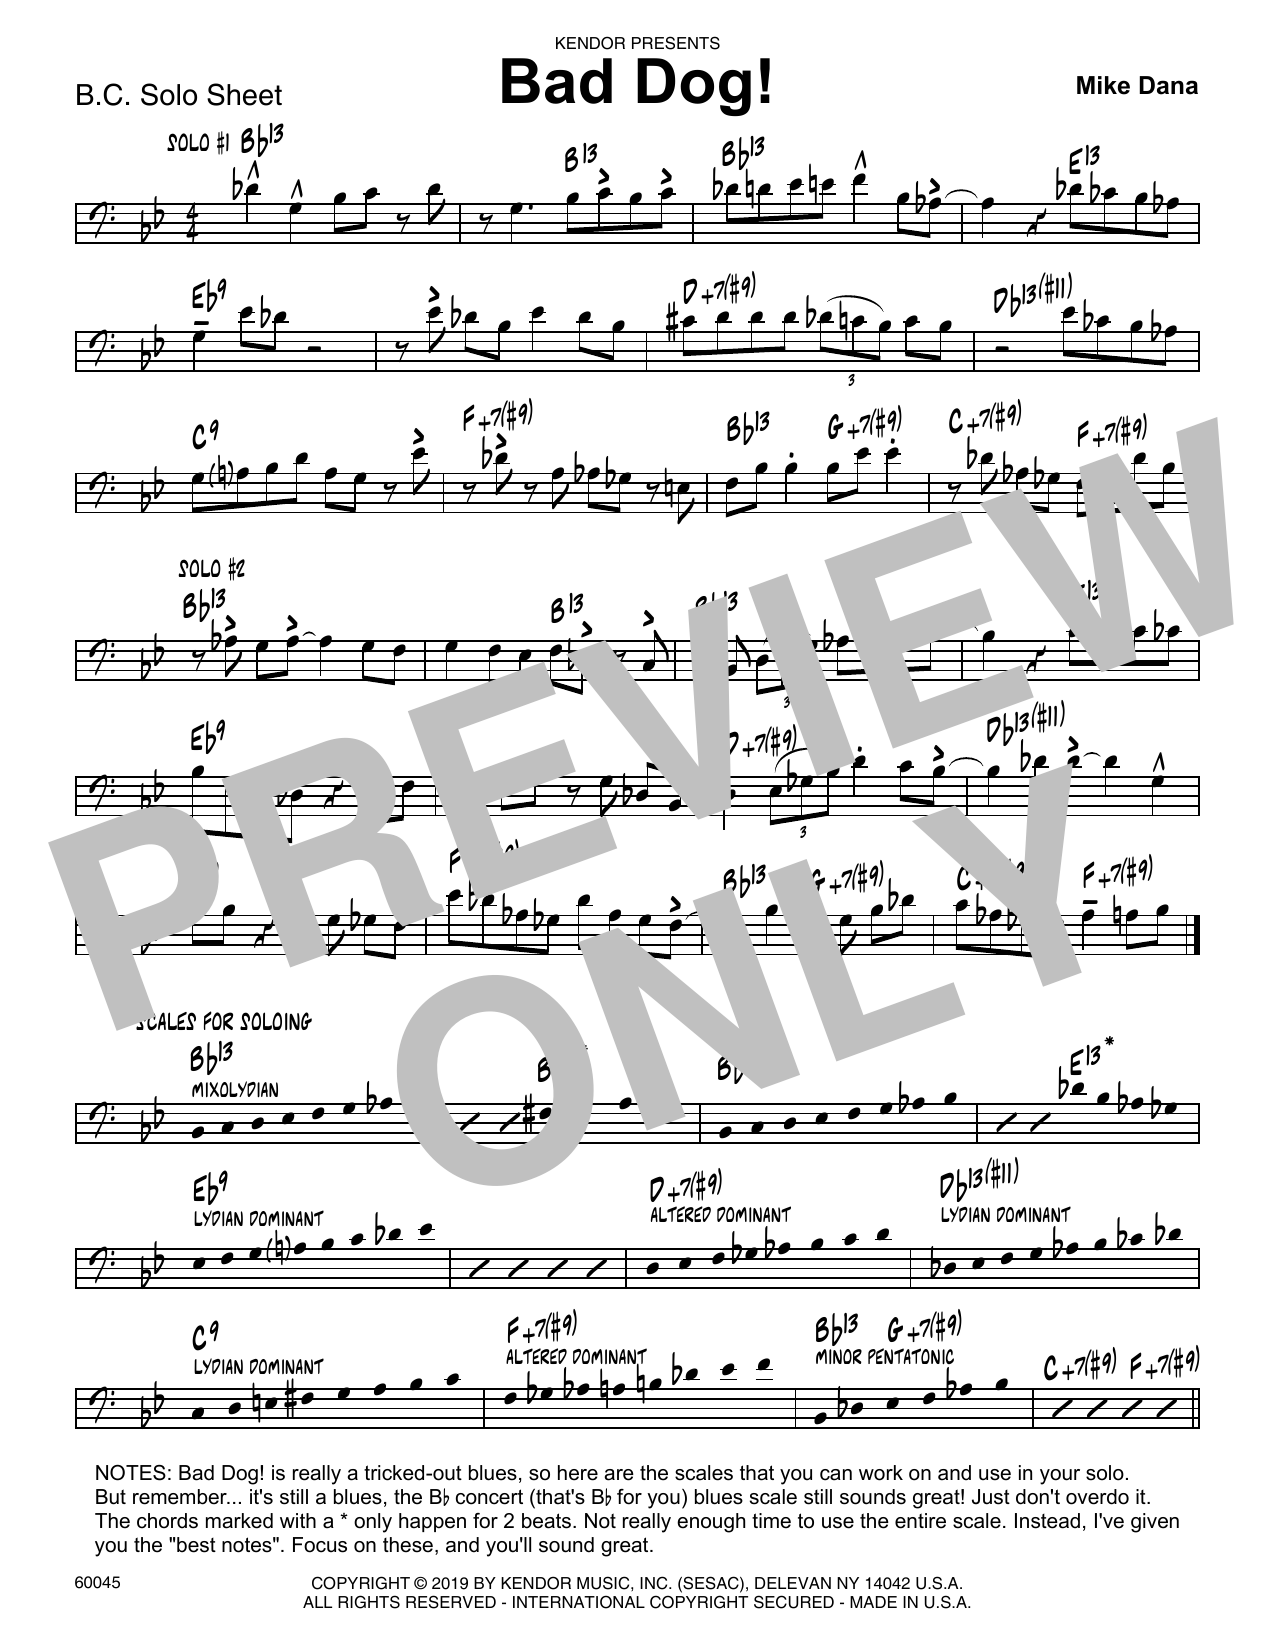 Download Mike Dana Bad Dog! - Sample Solo - Bass Clef Inst Sheet Music